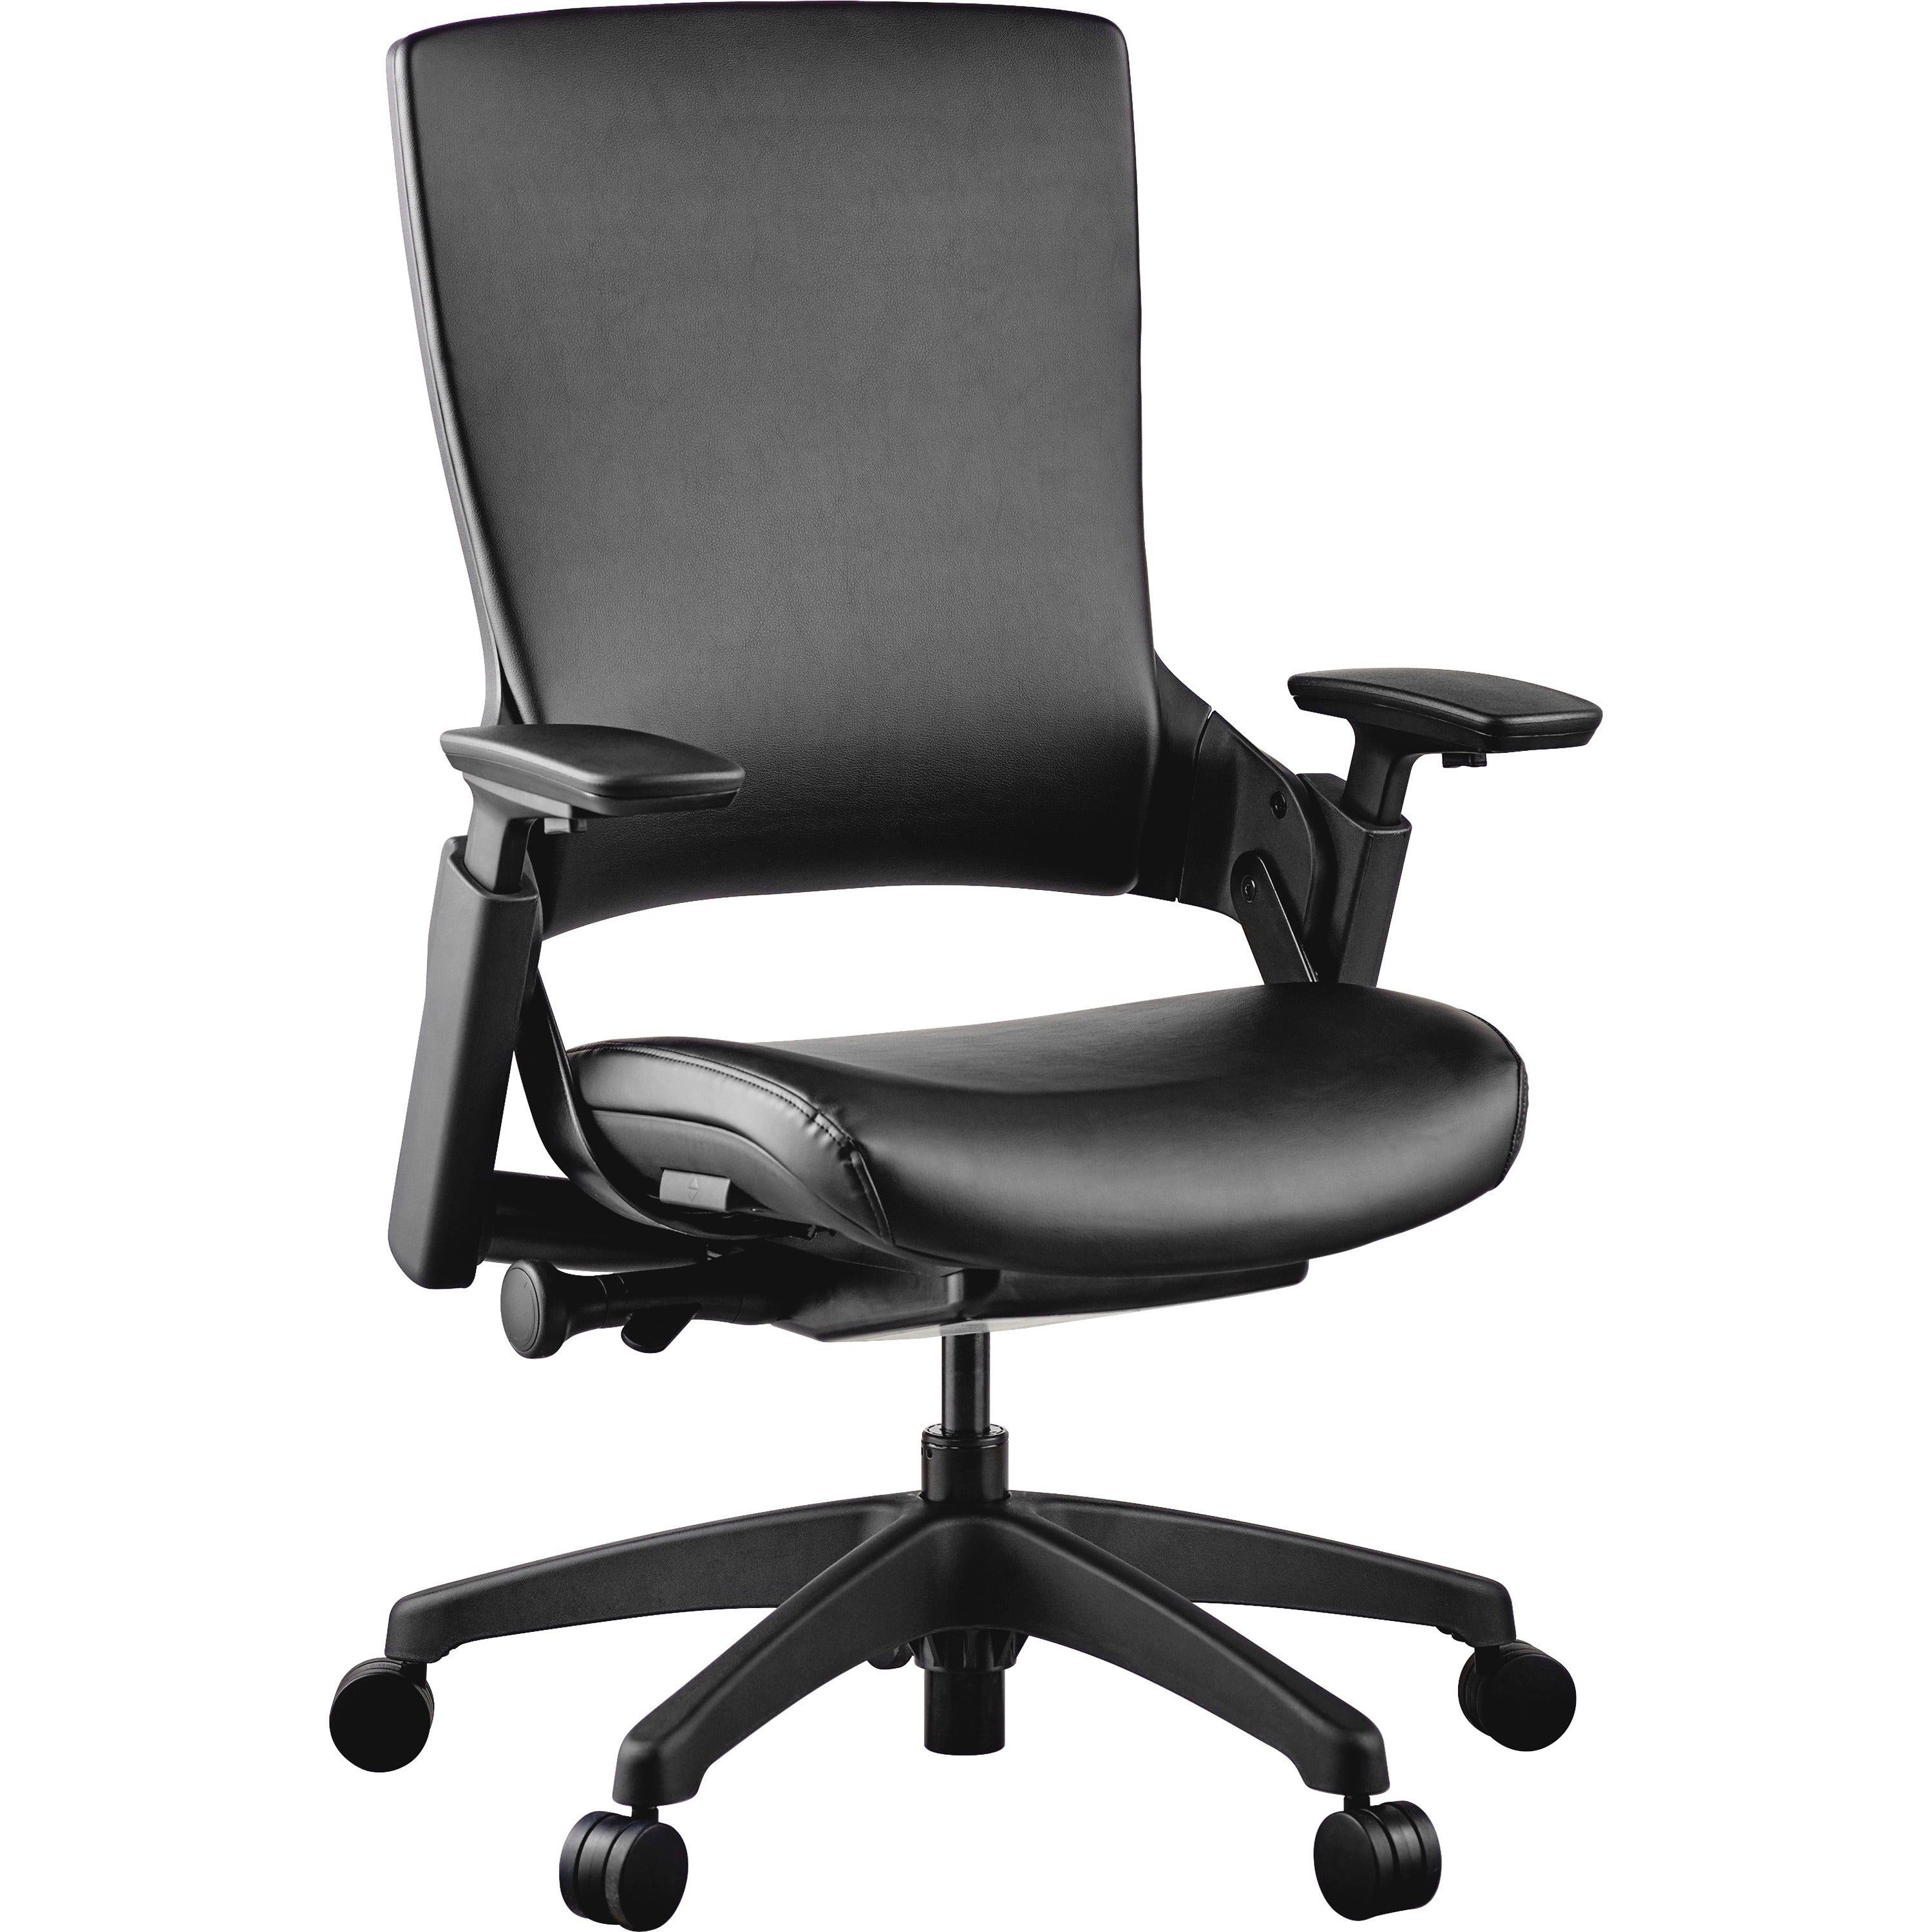 Lorell Serenity Series Executive Multifunction High-back Chair - Leather Seat - Leather Back - High Back - 1 Each - 